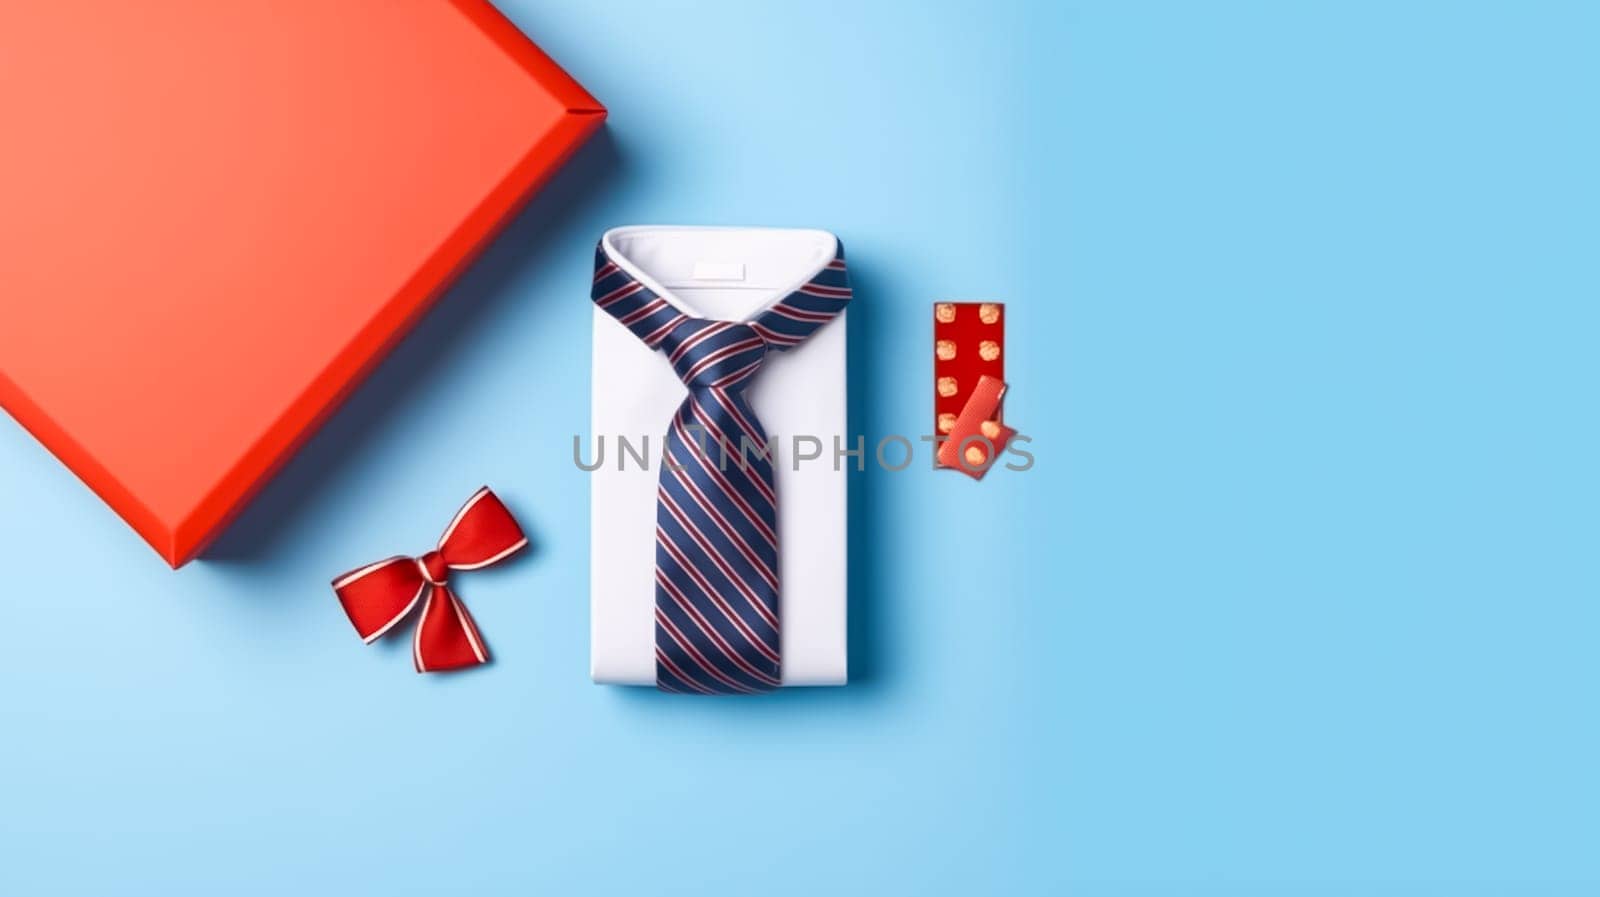 Celebrate Fathers Day in style with a gift box, necktie, and glasses elegantly arranged by Alla_Morozova93